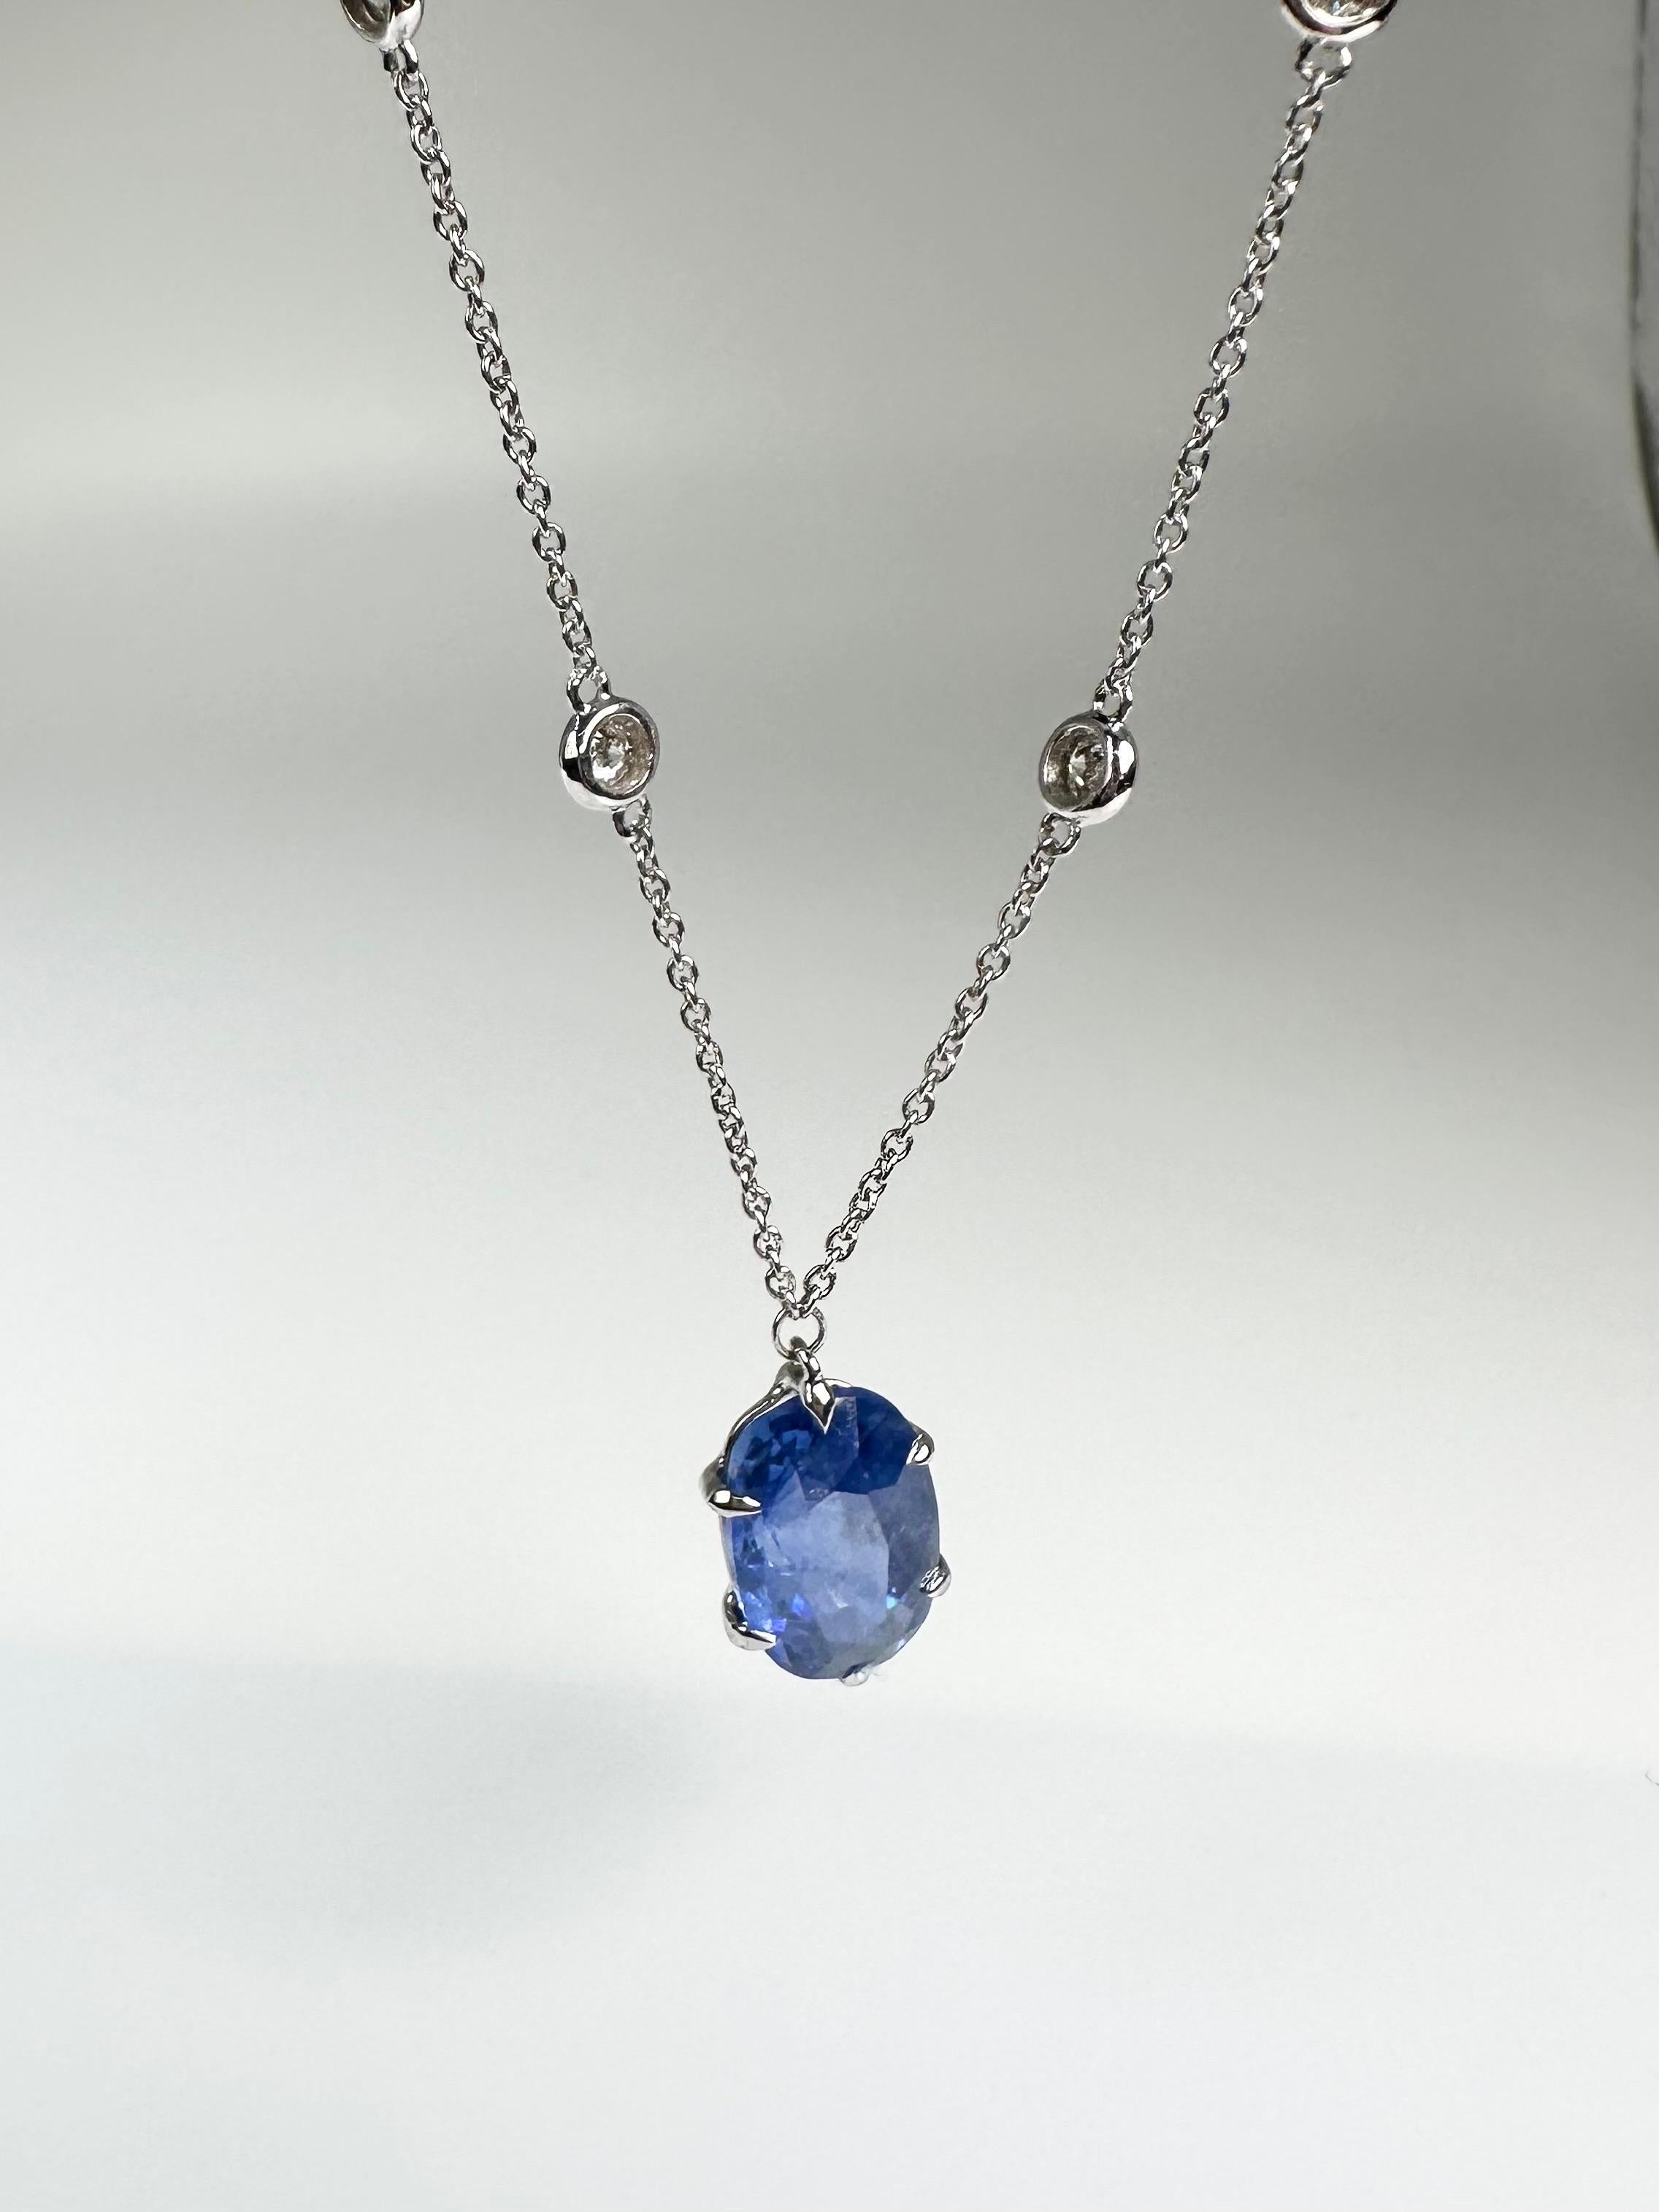 Rare Large Sapphire Diamond Pendant Necklace by the Yard 14kt 5.14ct Sapphire For Sale 2